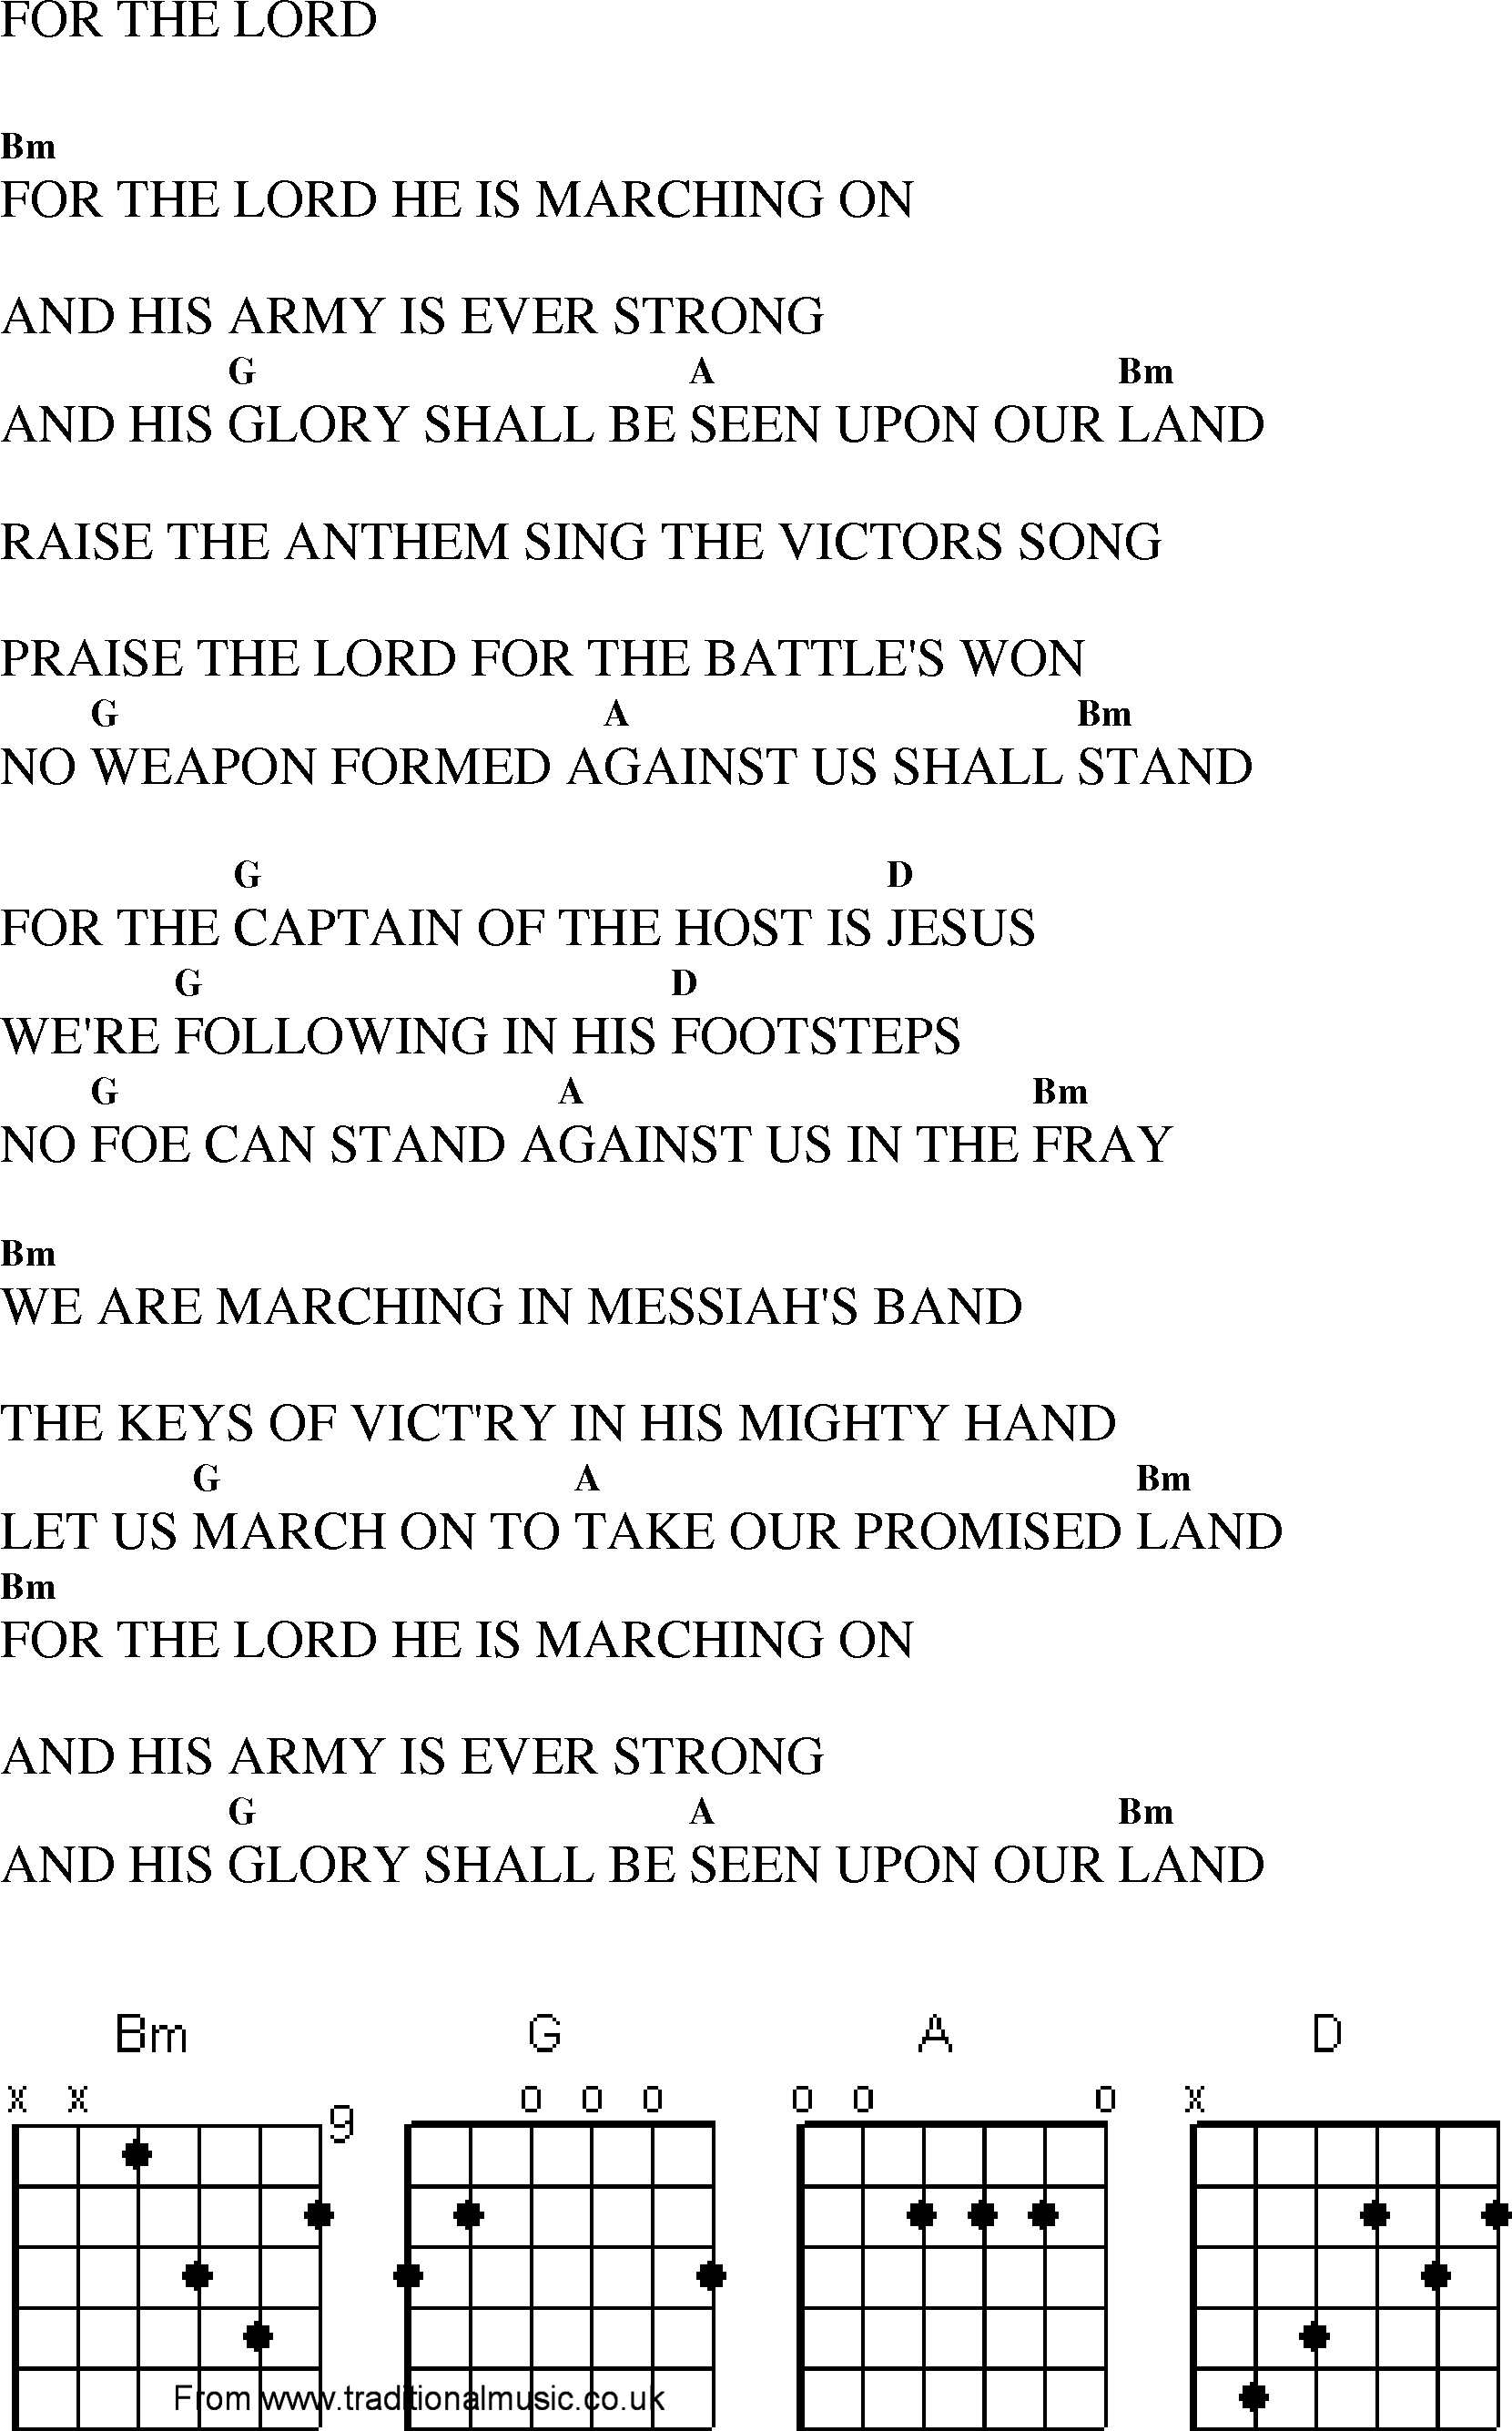 Gospel Song: for_the_lord, lyrics and chords.